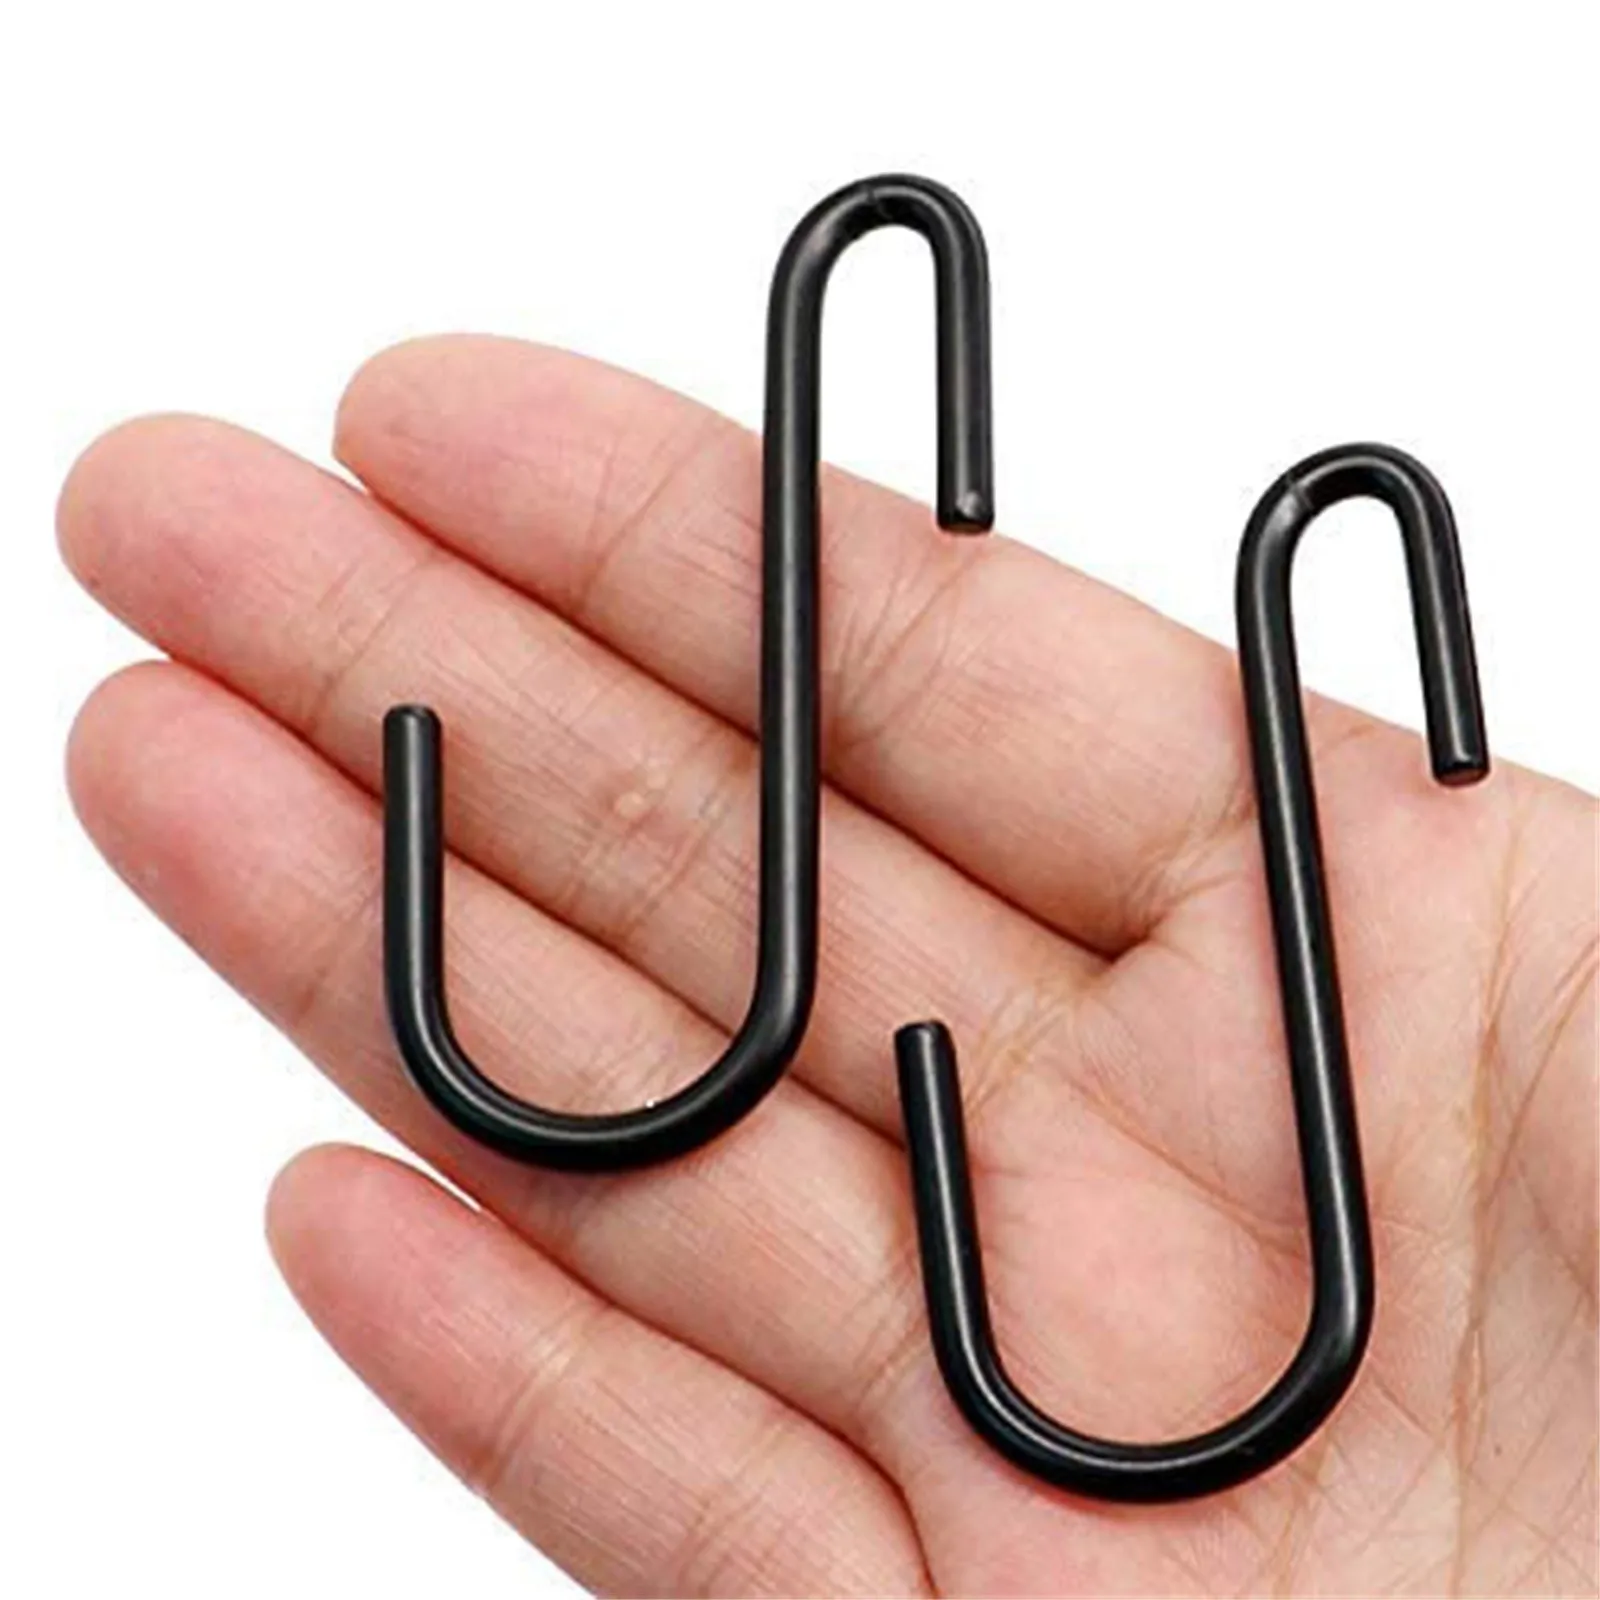 Hooks Stainless Steel 10pcs Black S Shaped Hooks Kitchen S Type Hooks For Hanging Pans Pots Bag Towels Housekeeping Sturdy